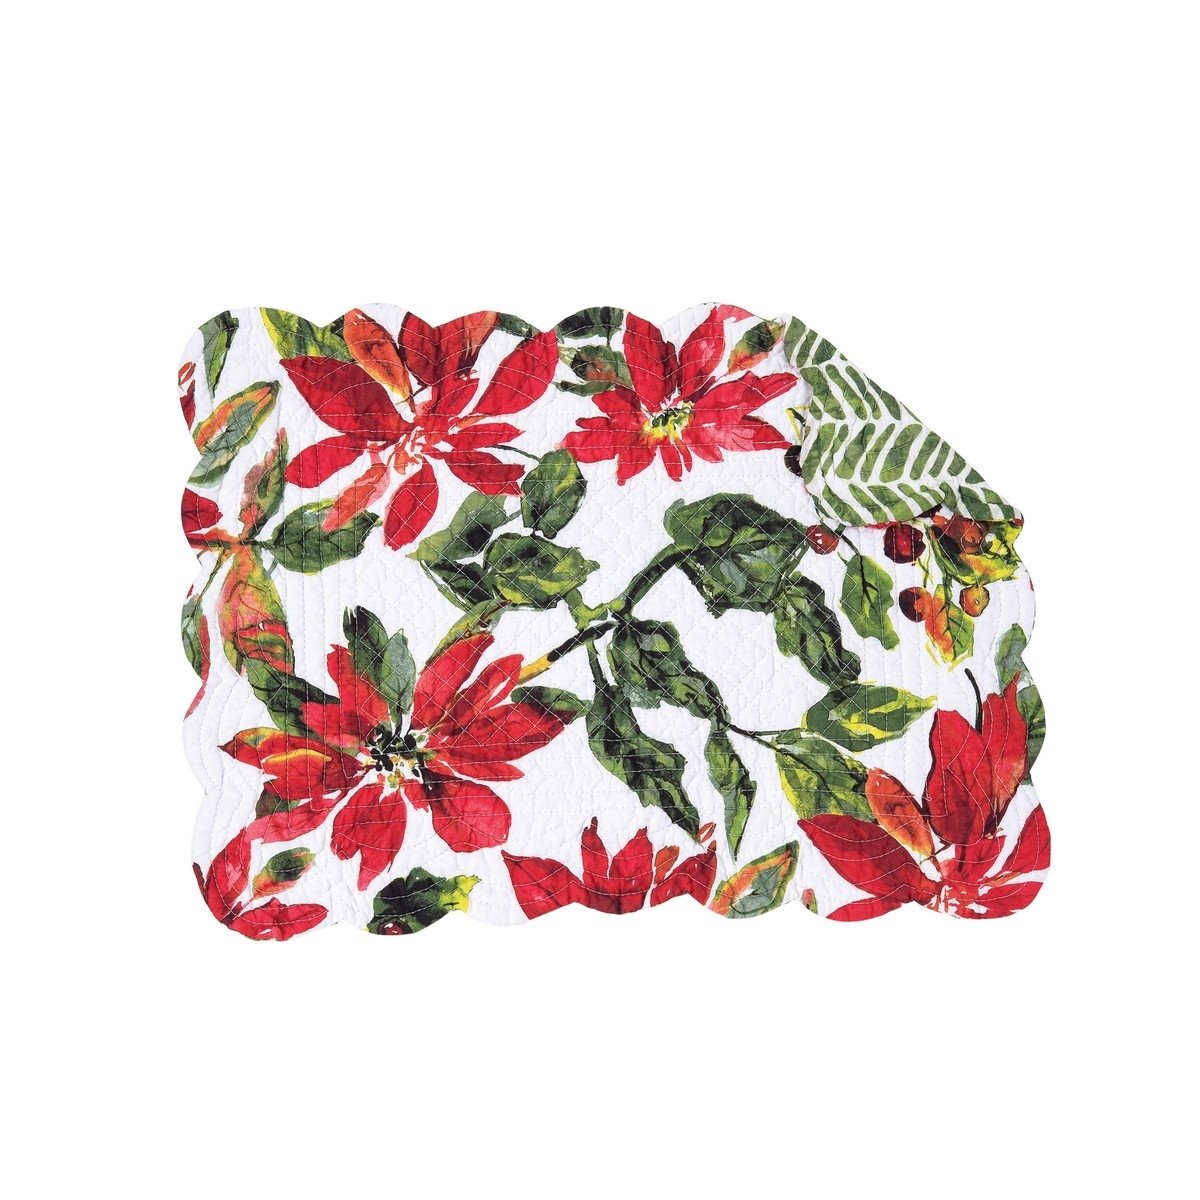 Poinsettia Berries Rectangular Quilted Placemat